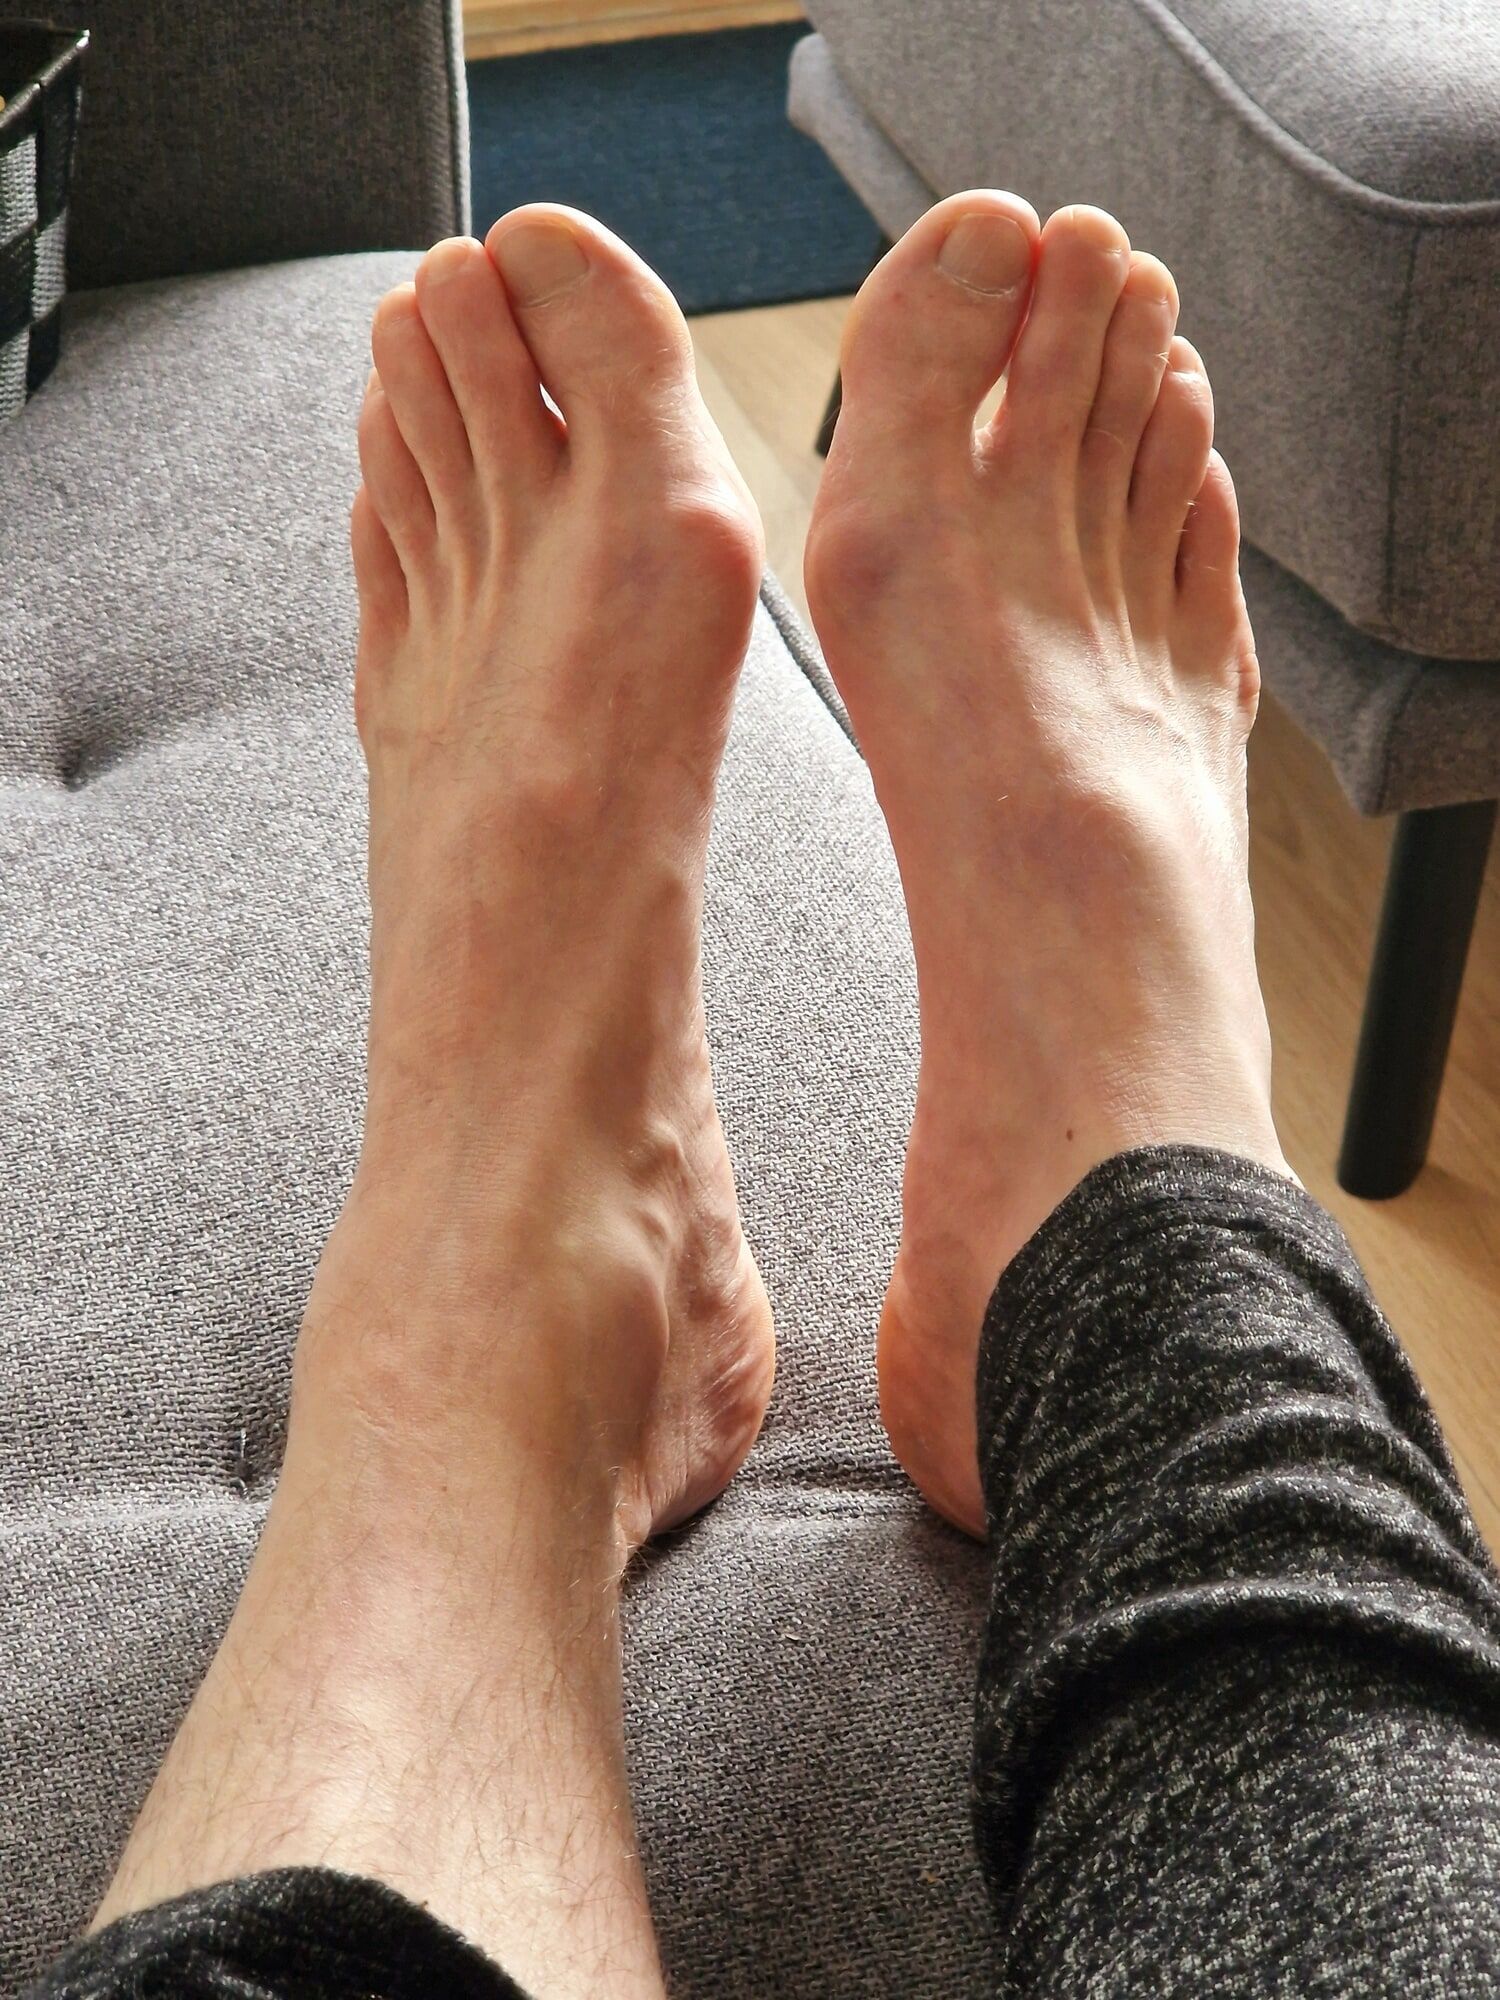 For foot the foot lover, my first foot post